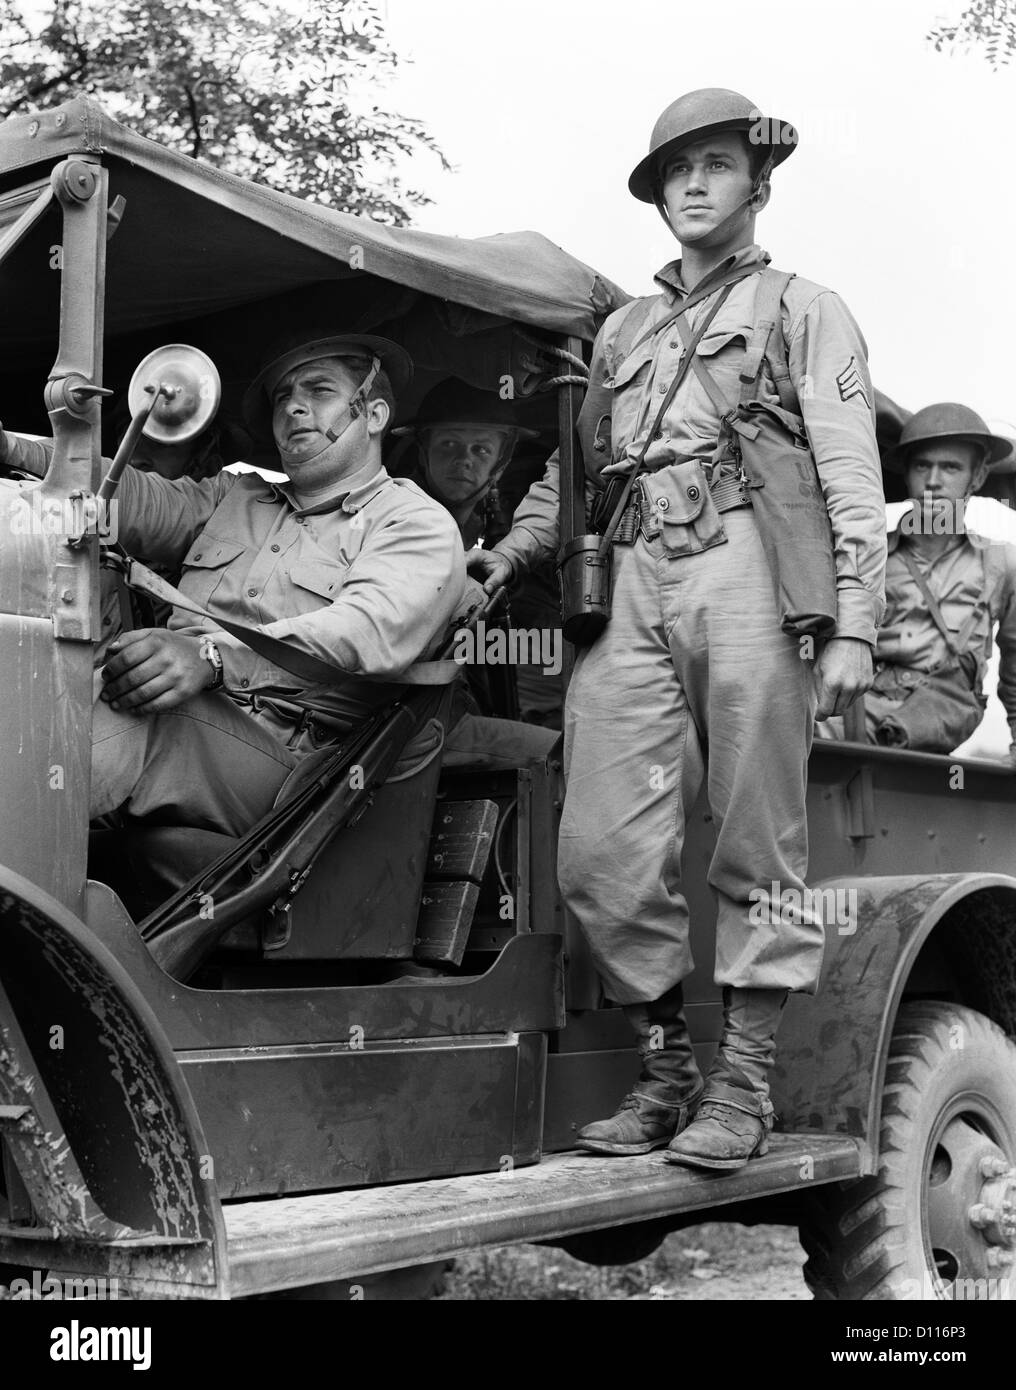 1940s US ARMY SOLDIERS RIDING ON MILITARY TRUCK Stock Photo